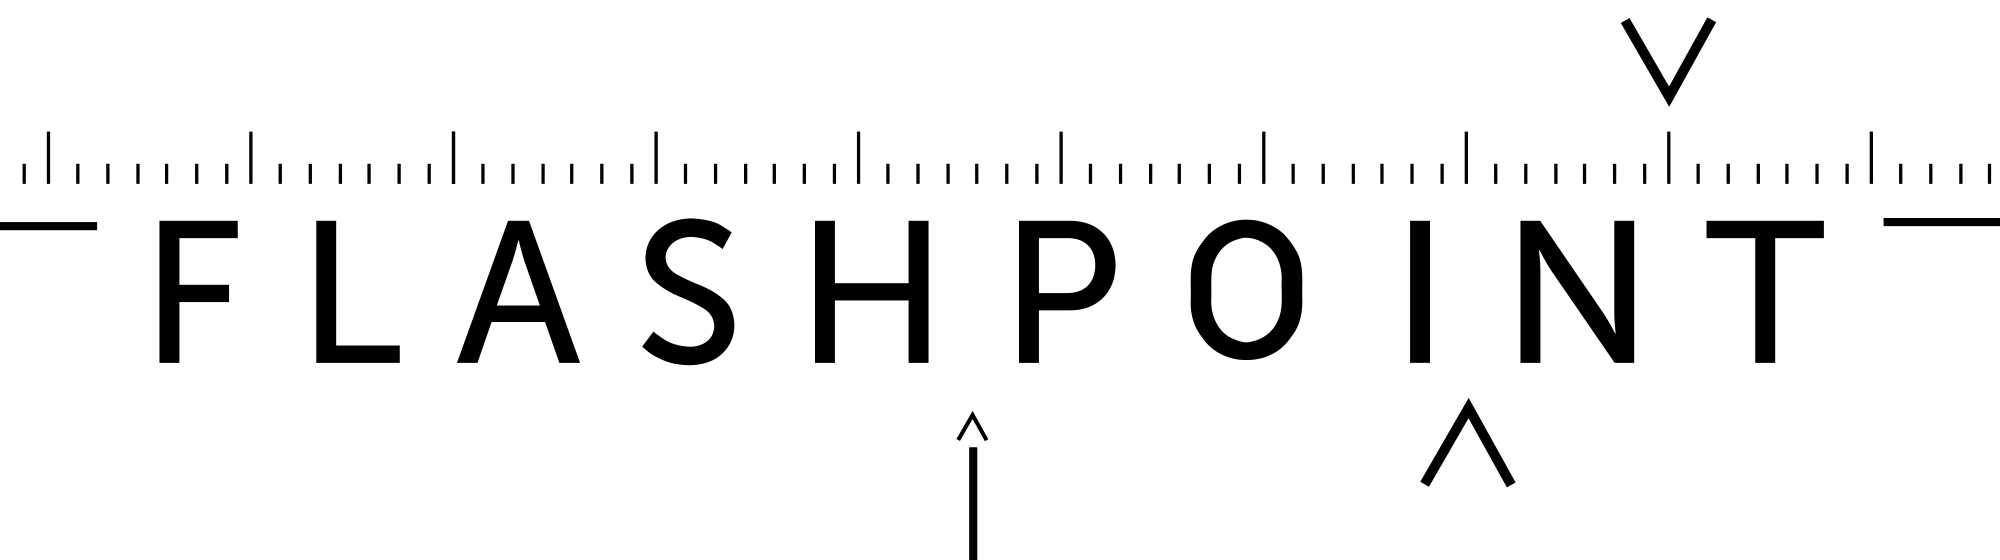 Flashpoint Logo - File:Flashpoint.svg - Wikimedia Commons